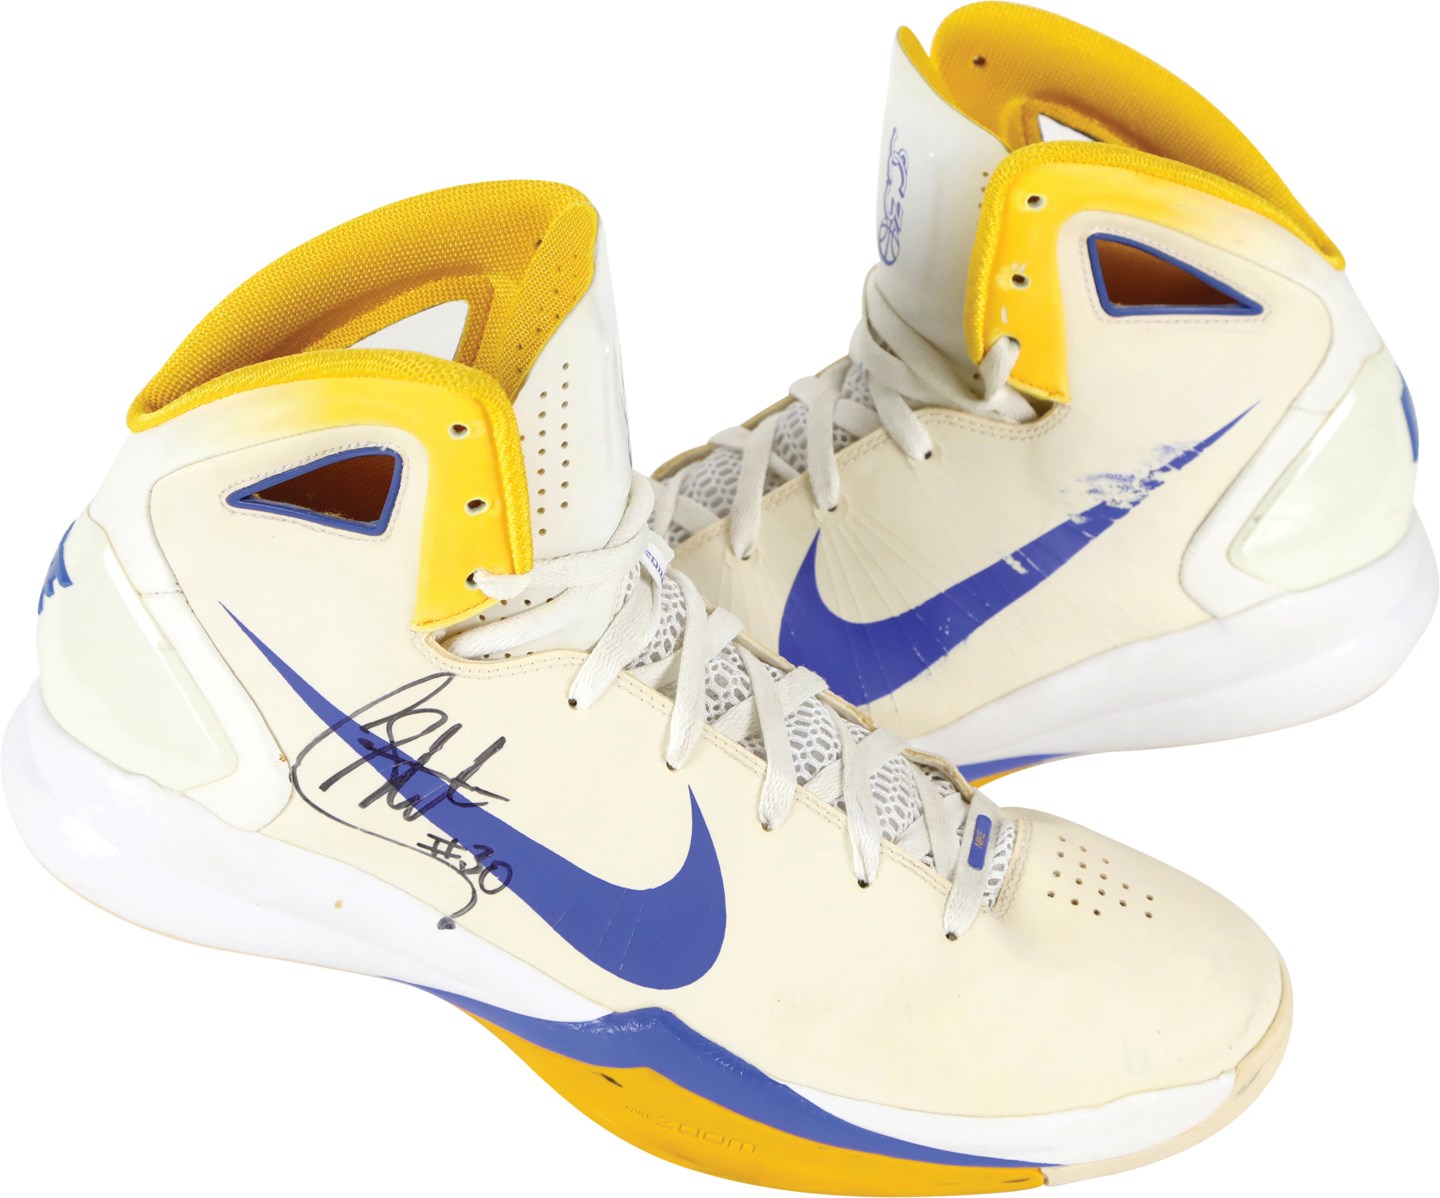 - 12/11 Stephen Curry Golden State Warriors Signed Game Used Sneakers - First Double-Double vs. Kobe Bryant (Resolution Photomatching LOA & PSA)